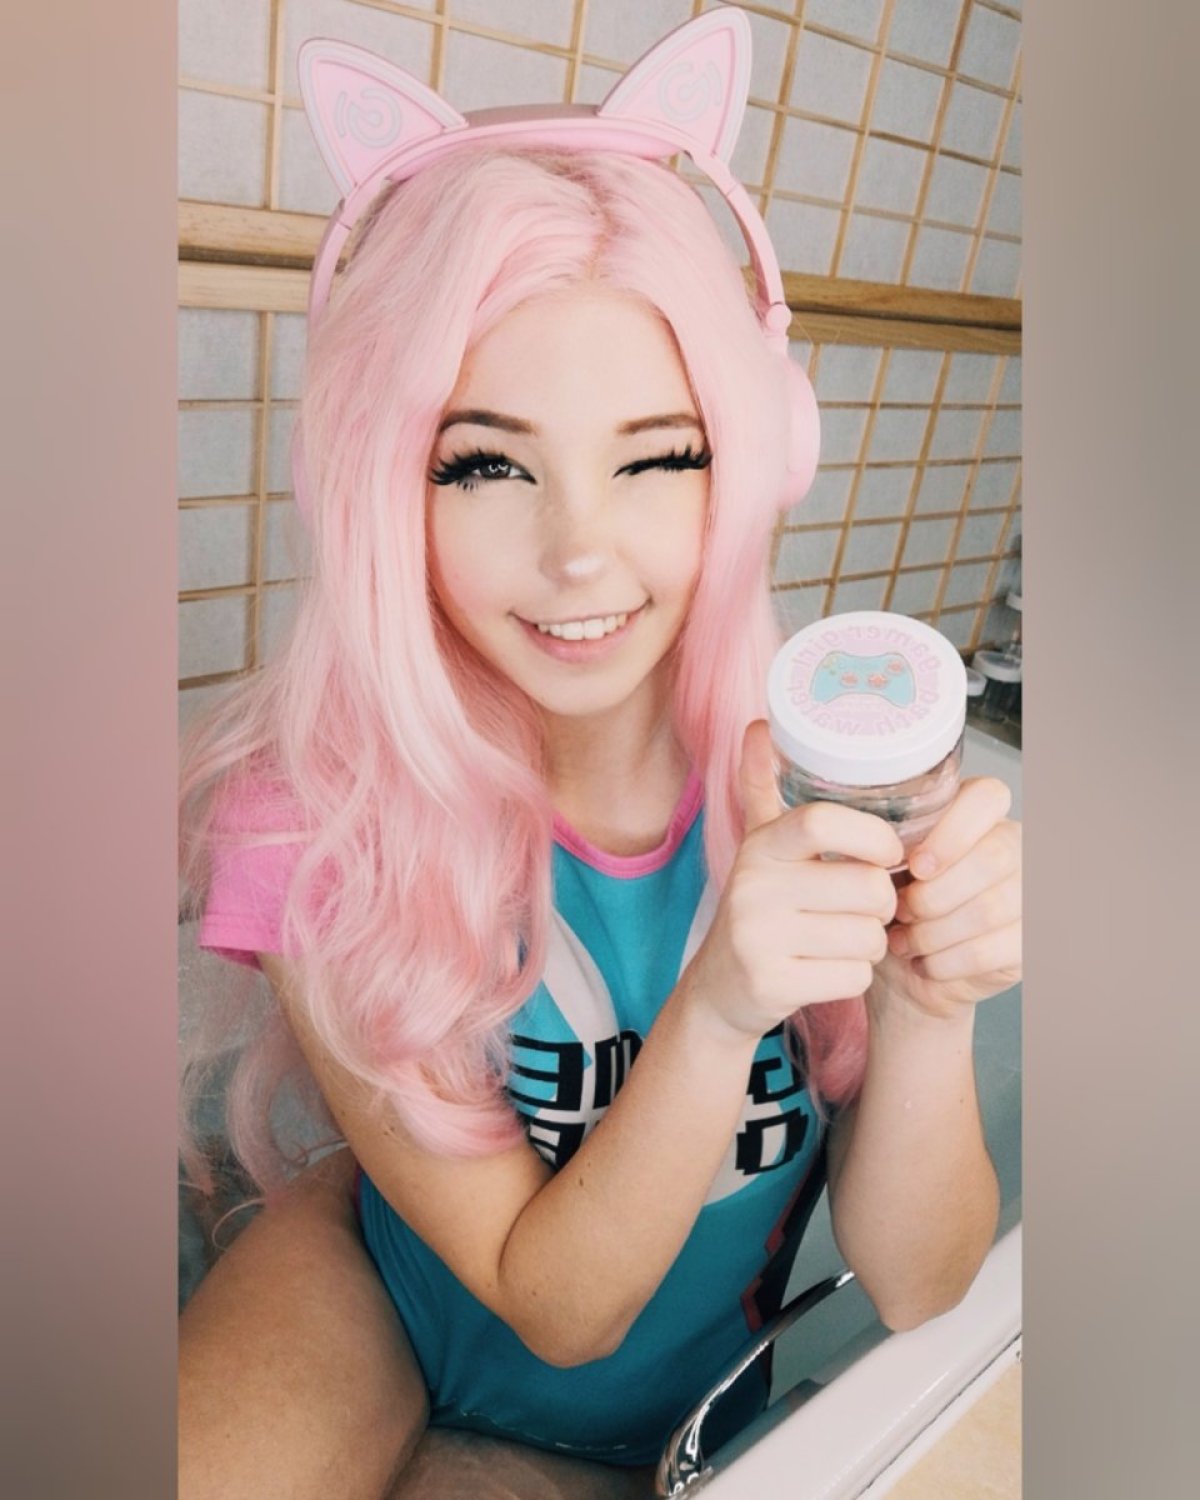 Instagram Model Belle Delphine Sells Her Used Bathwater To Thirsty Gamers -  FAIL Blog - Funny Fails